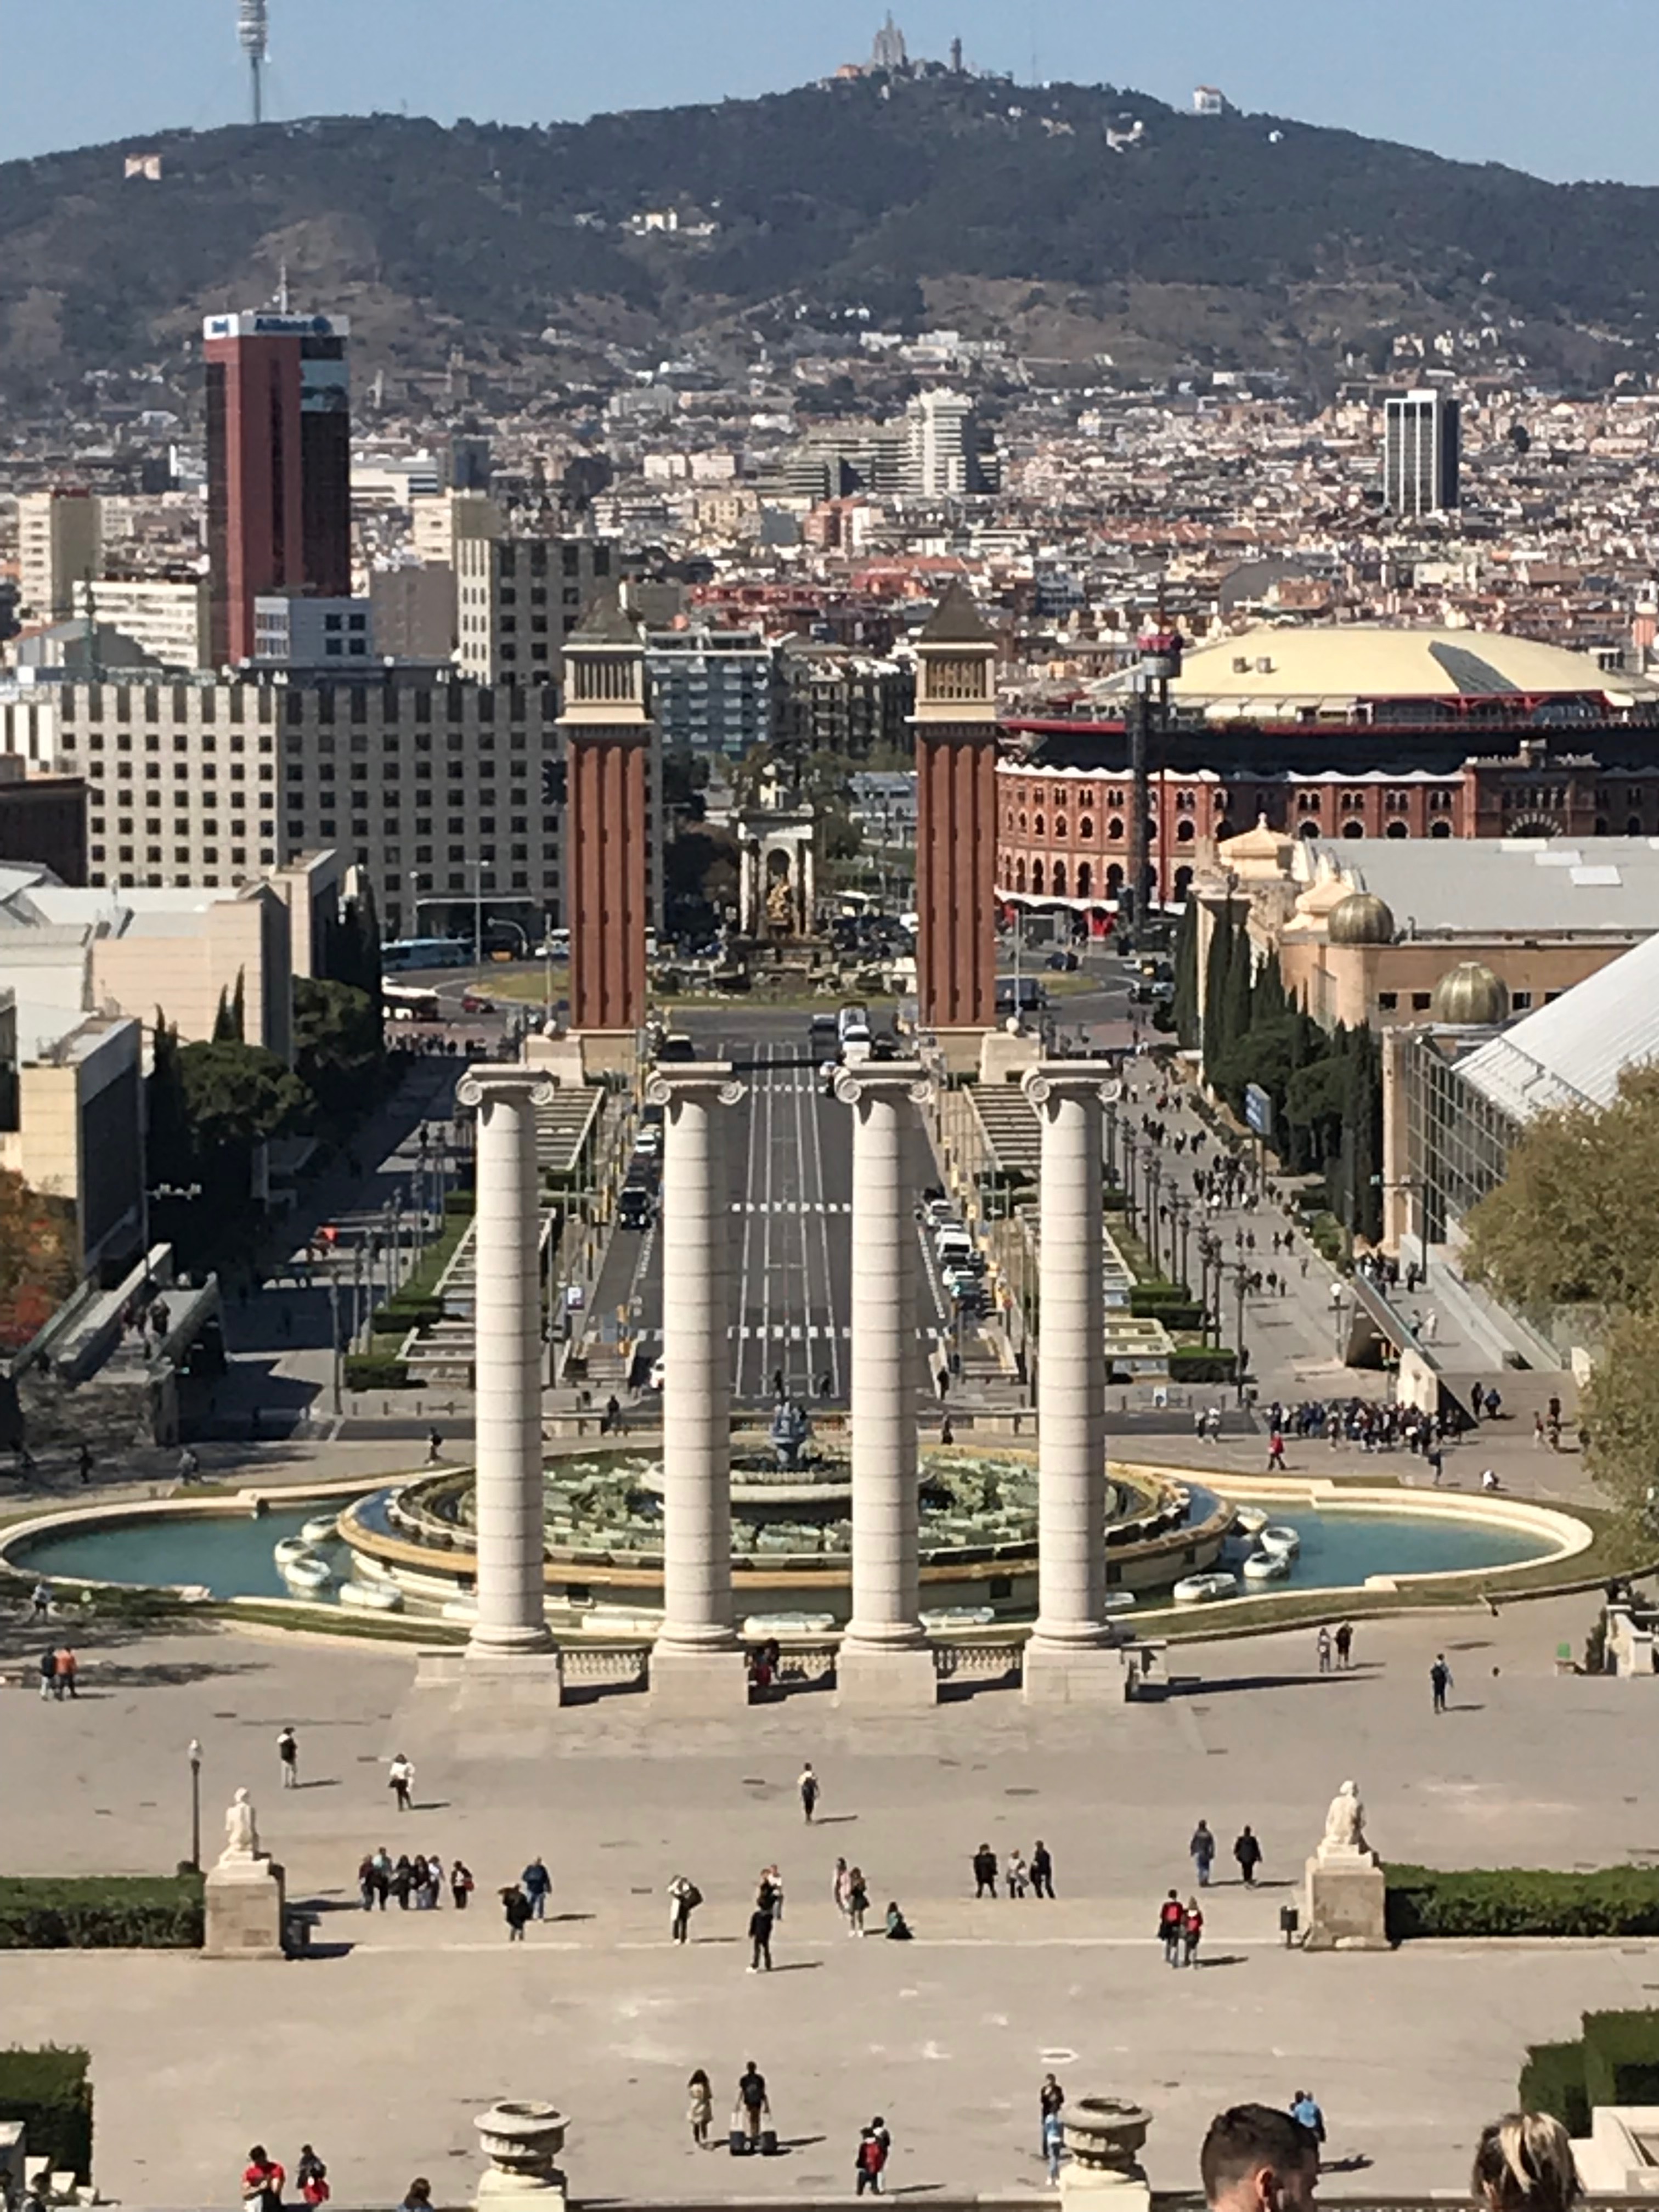 The view from the steps of MNAC is incredible and one of the best things about Barcelona.